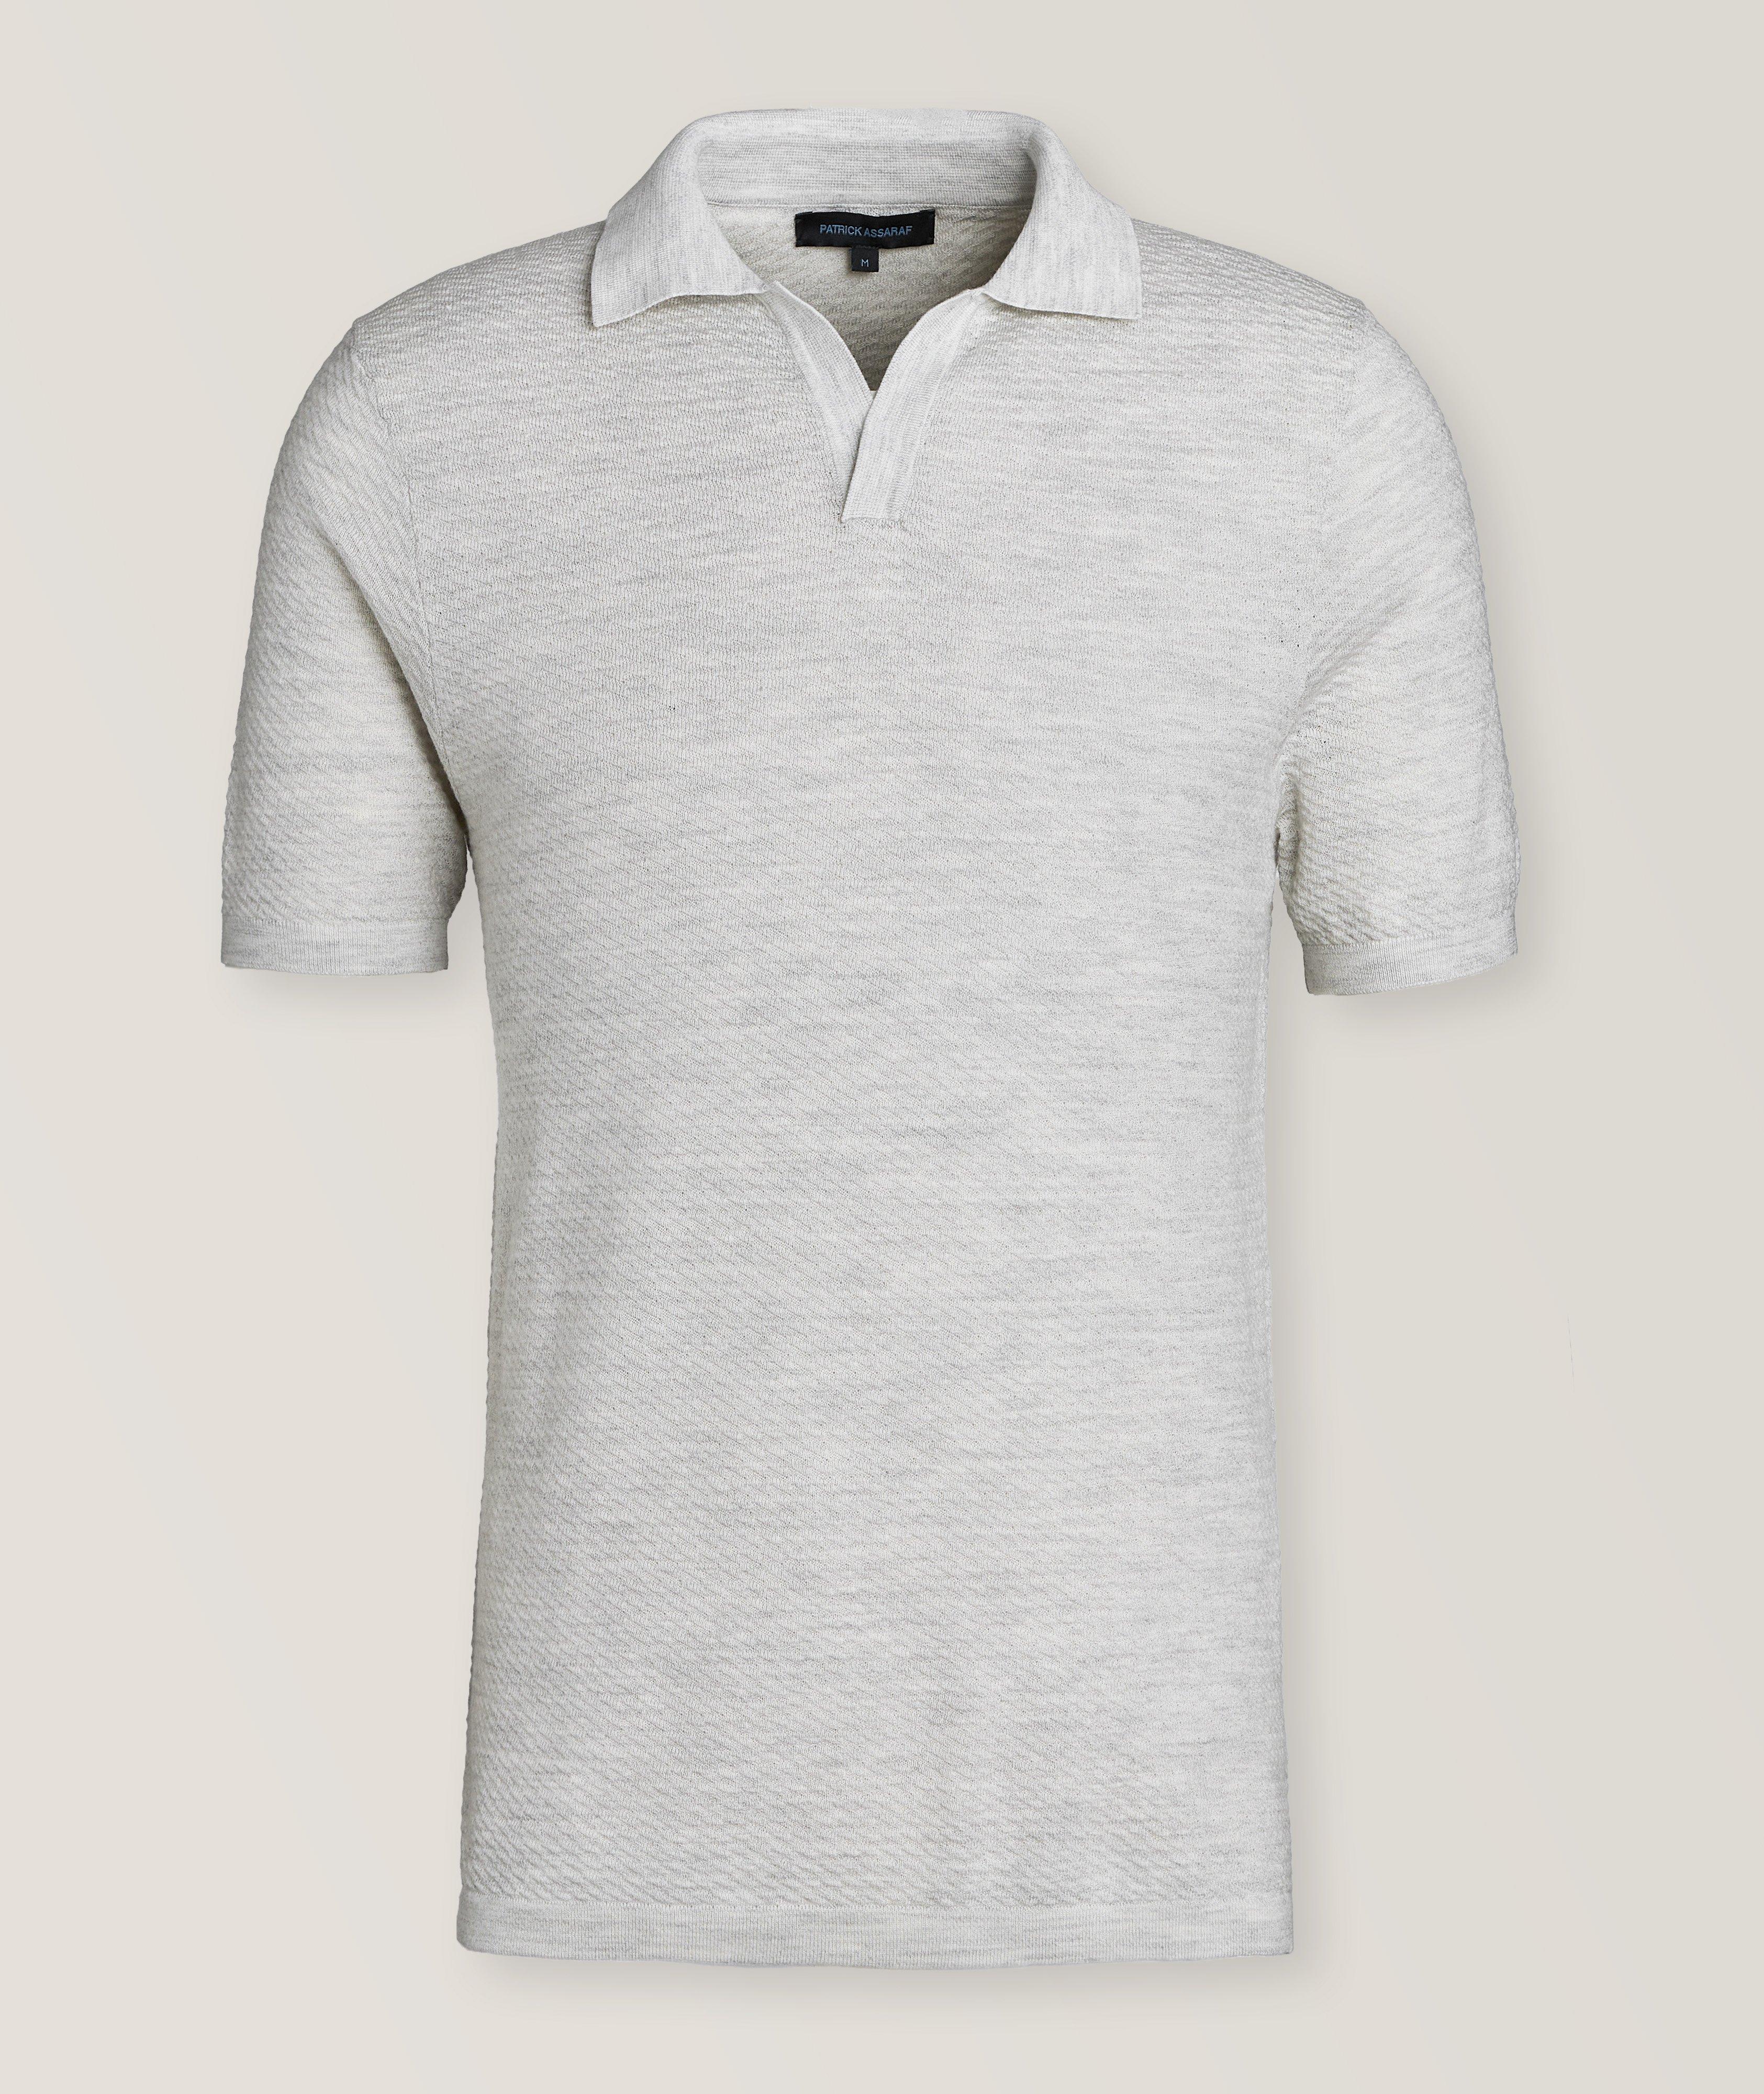 Textured Cotton-Blend Knit Polo  image 0